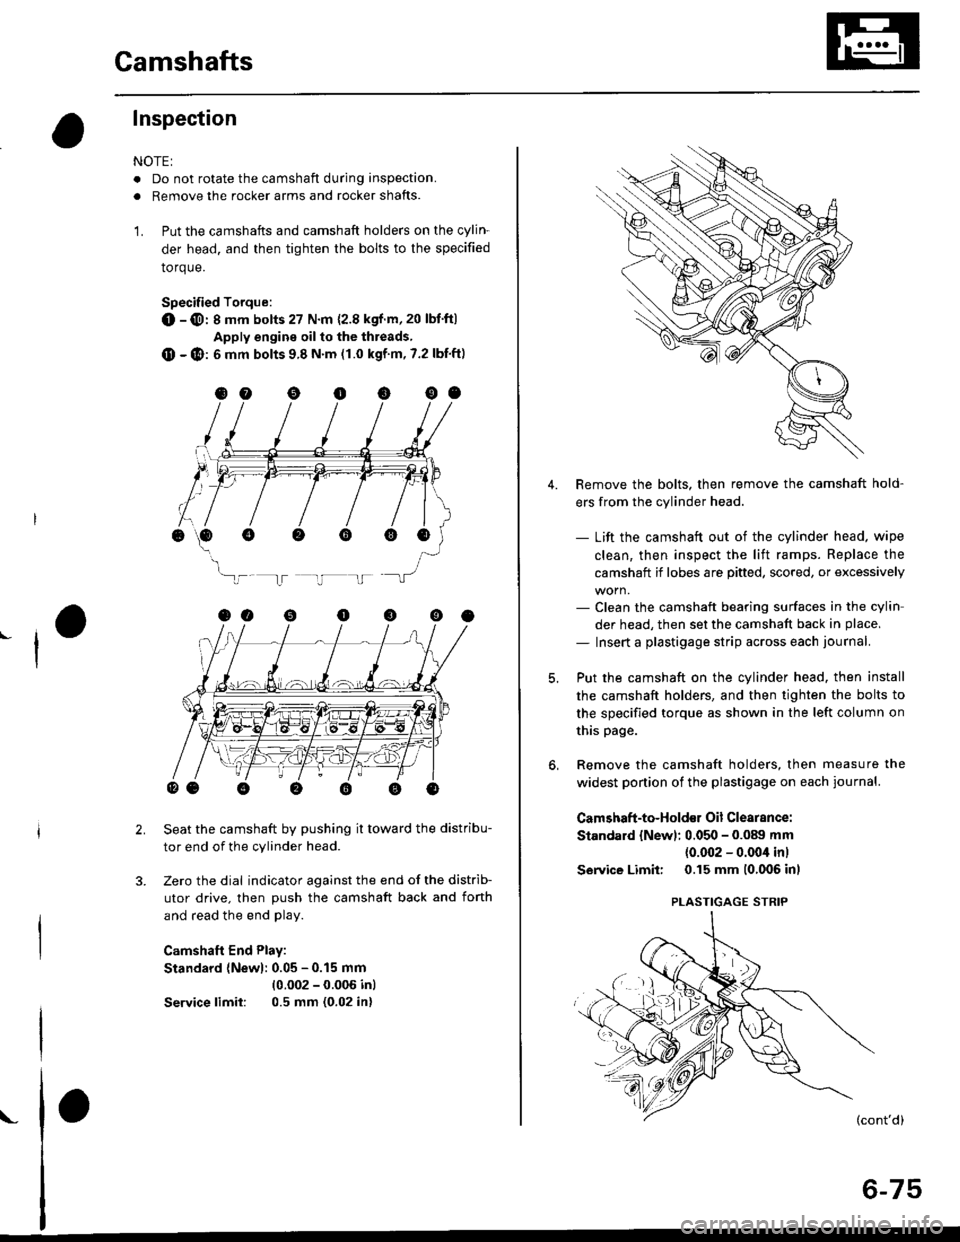 HONDA CIVIC 1996 6.G Workshop Manual Camshafts
Inspection
NOTE:
. Do not rotate the camshaft during inspection.
. Removg the rocker arms and rocker shafts.
L Put the camshafts and camshaft holders on the cylin-
der head. and then tighte